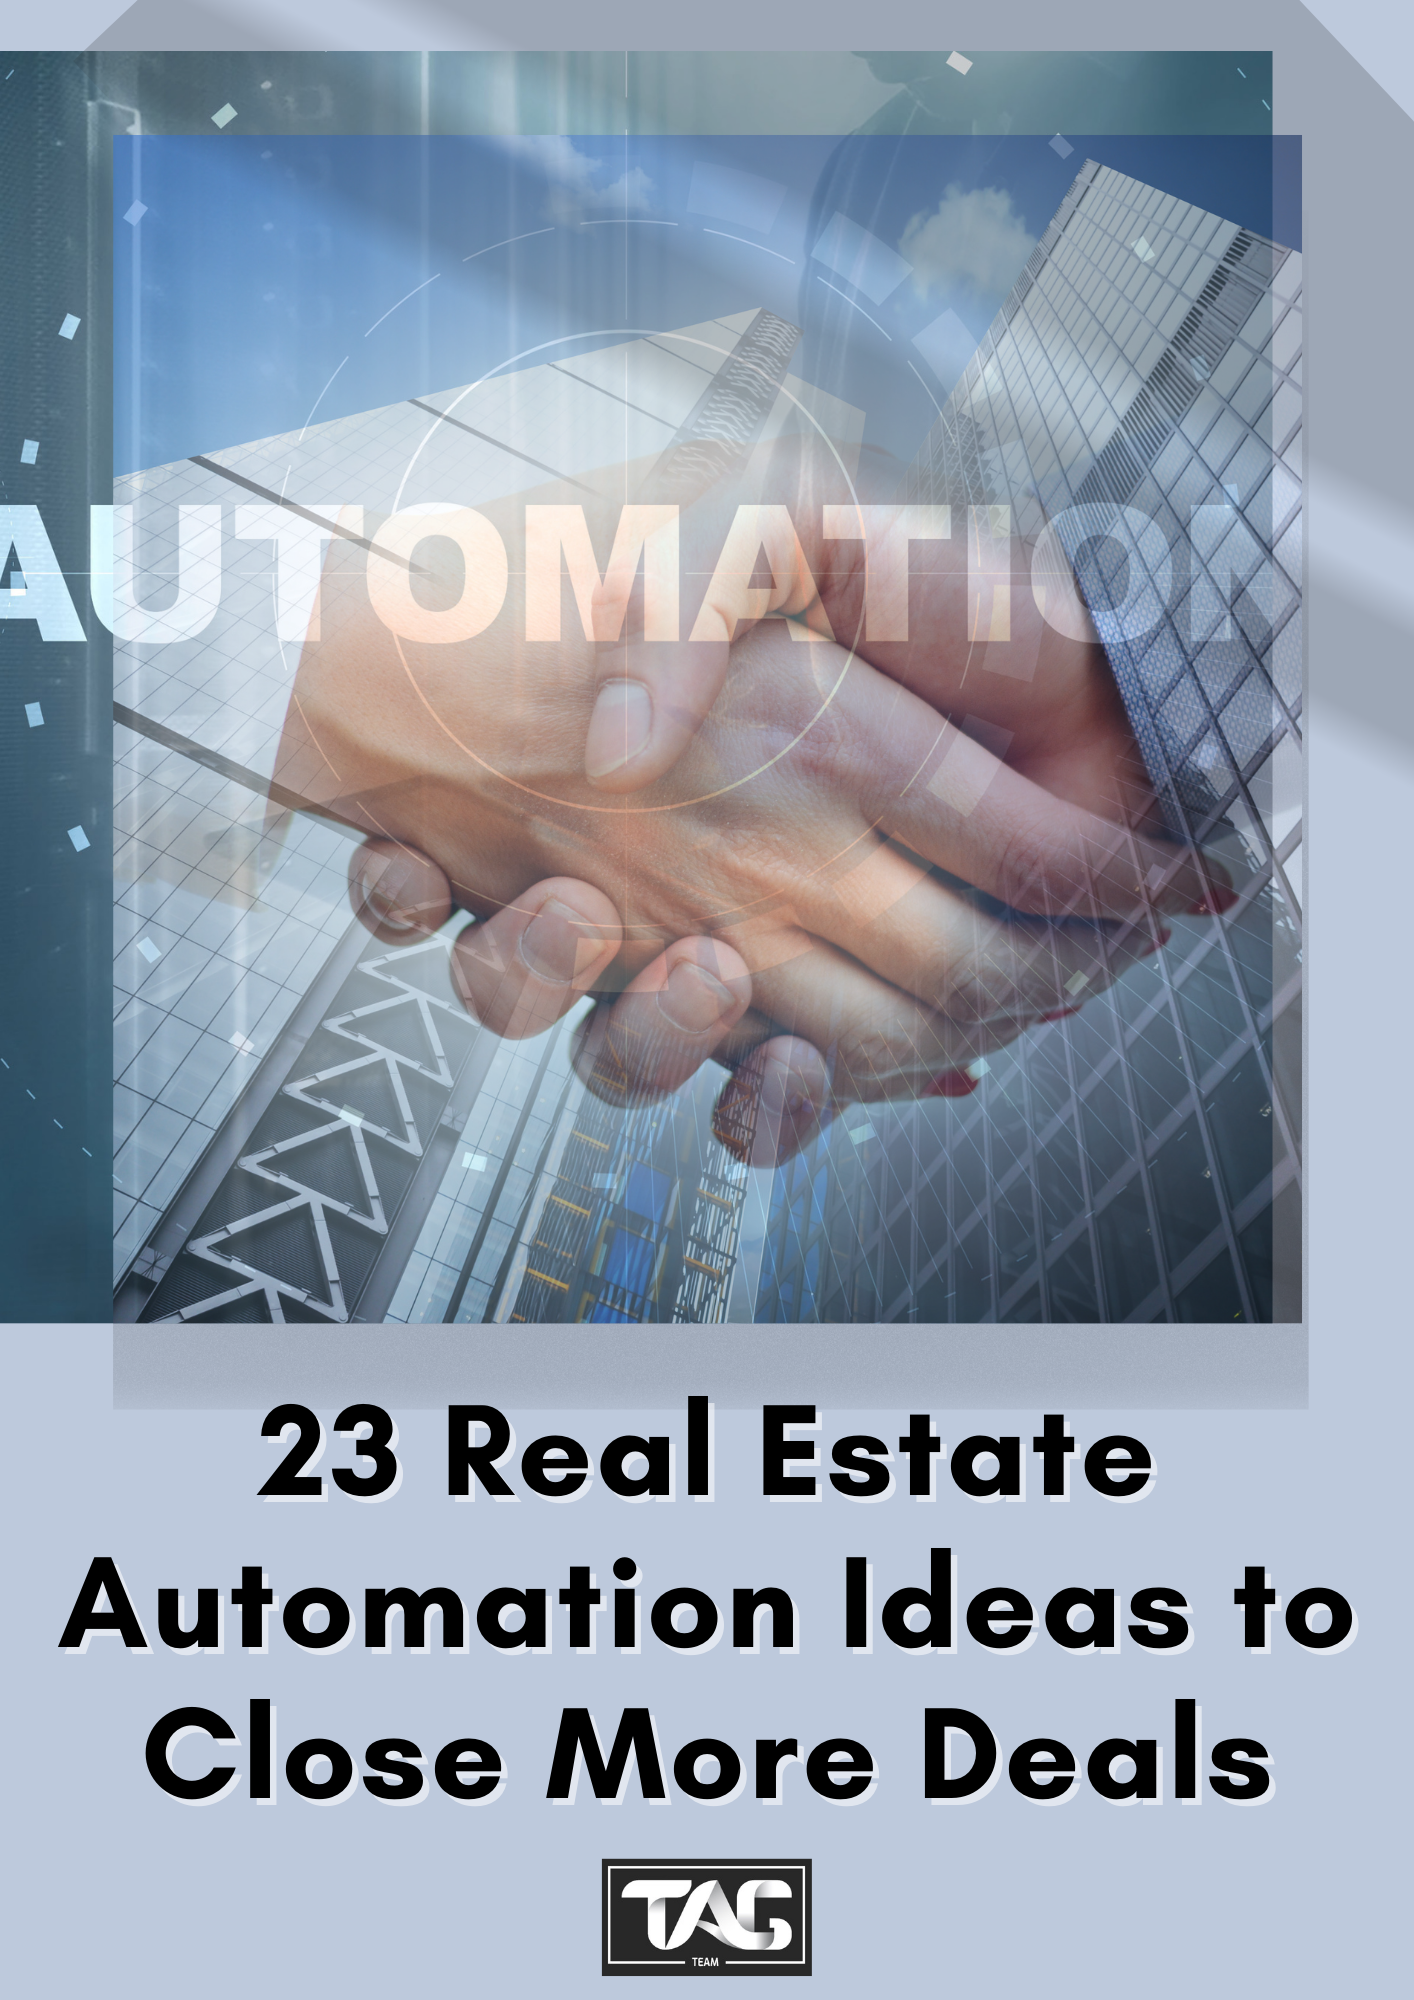 23 Real Estate Automation Ideas to Close More Deals